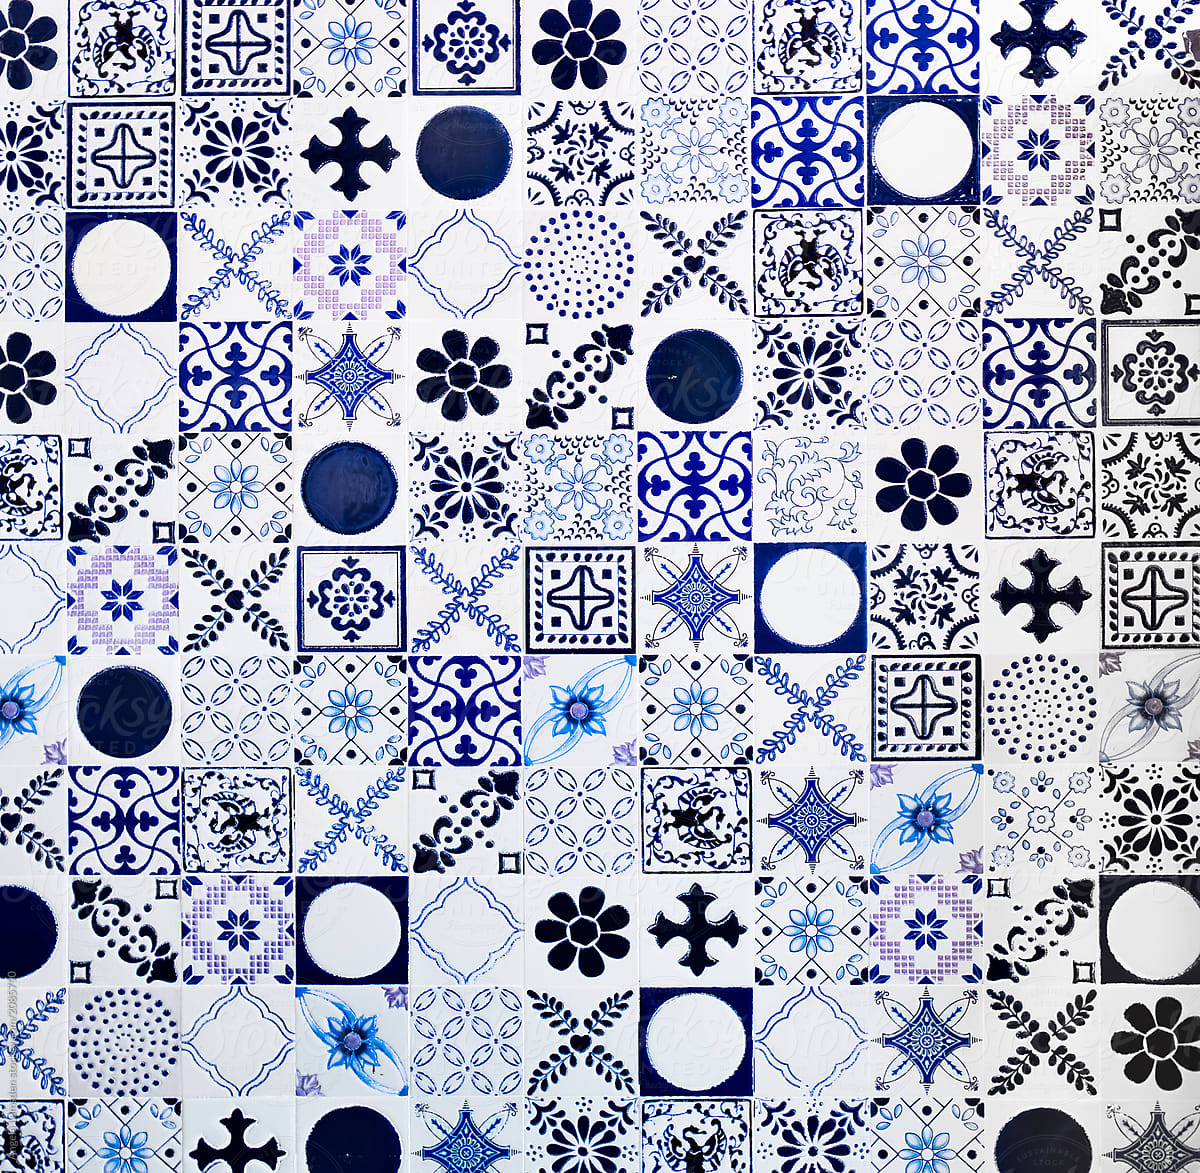 Blue And White Patterned Tiles By Angela Lumsden